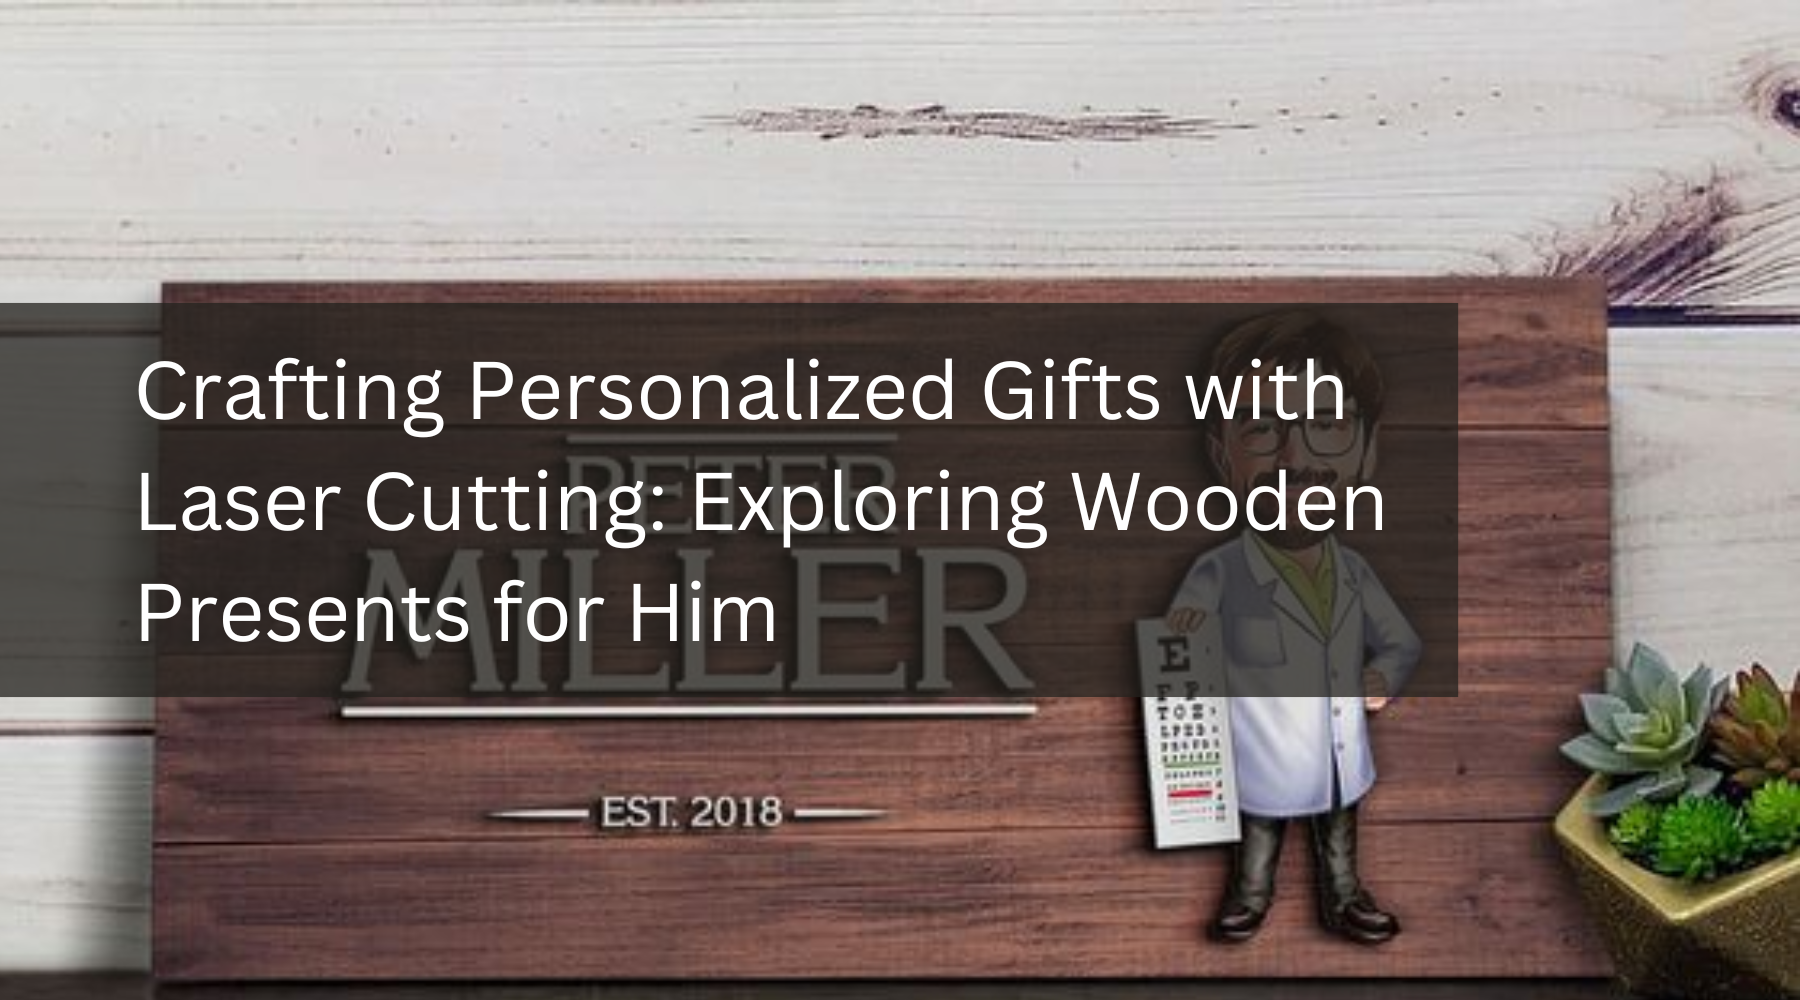 Crafting Personalized Gifts with Laser Cutting: Exploring Wooden Presents for Him